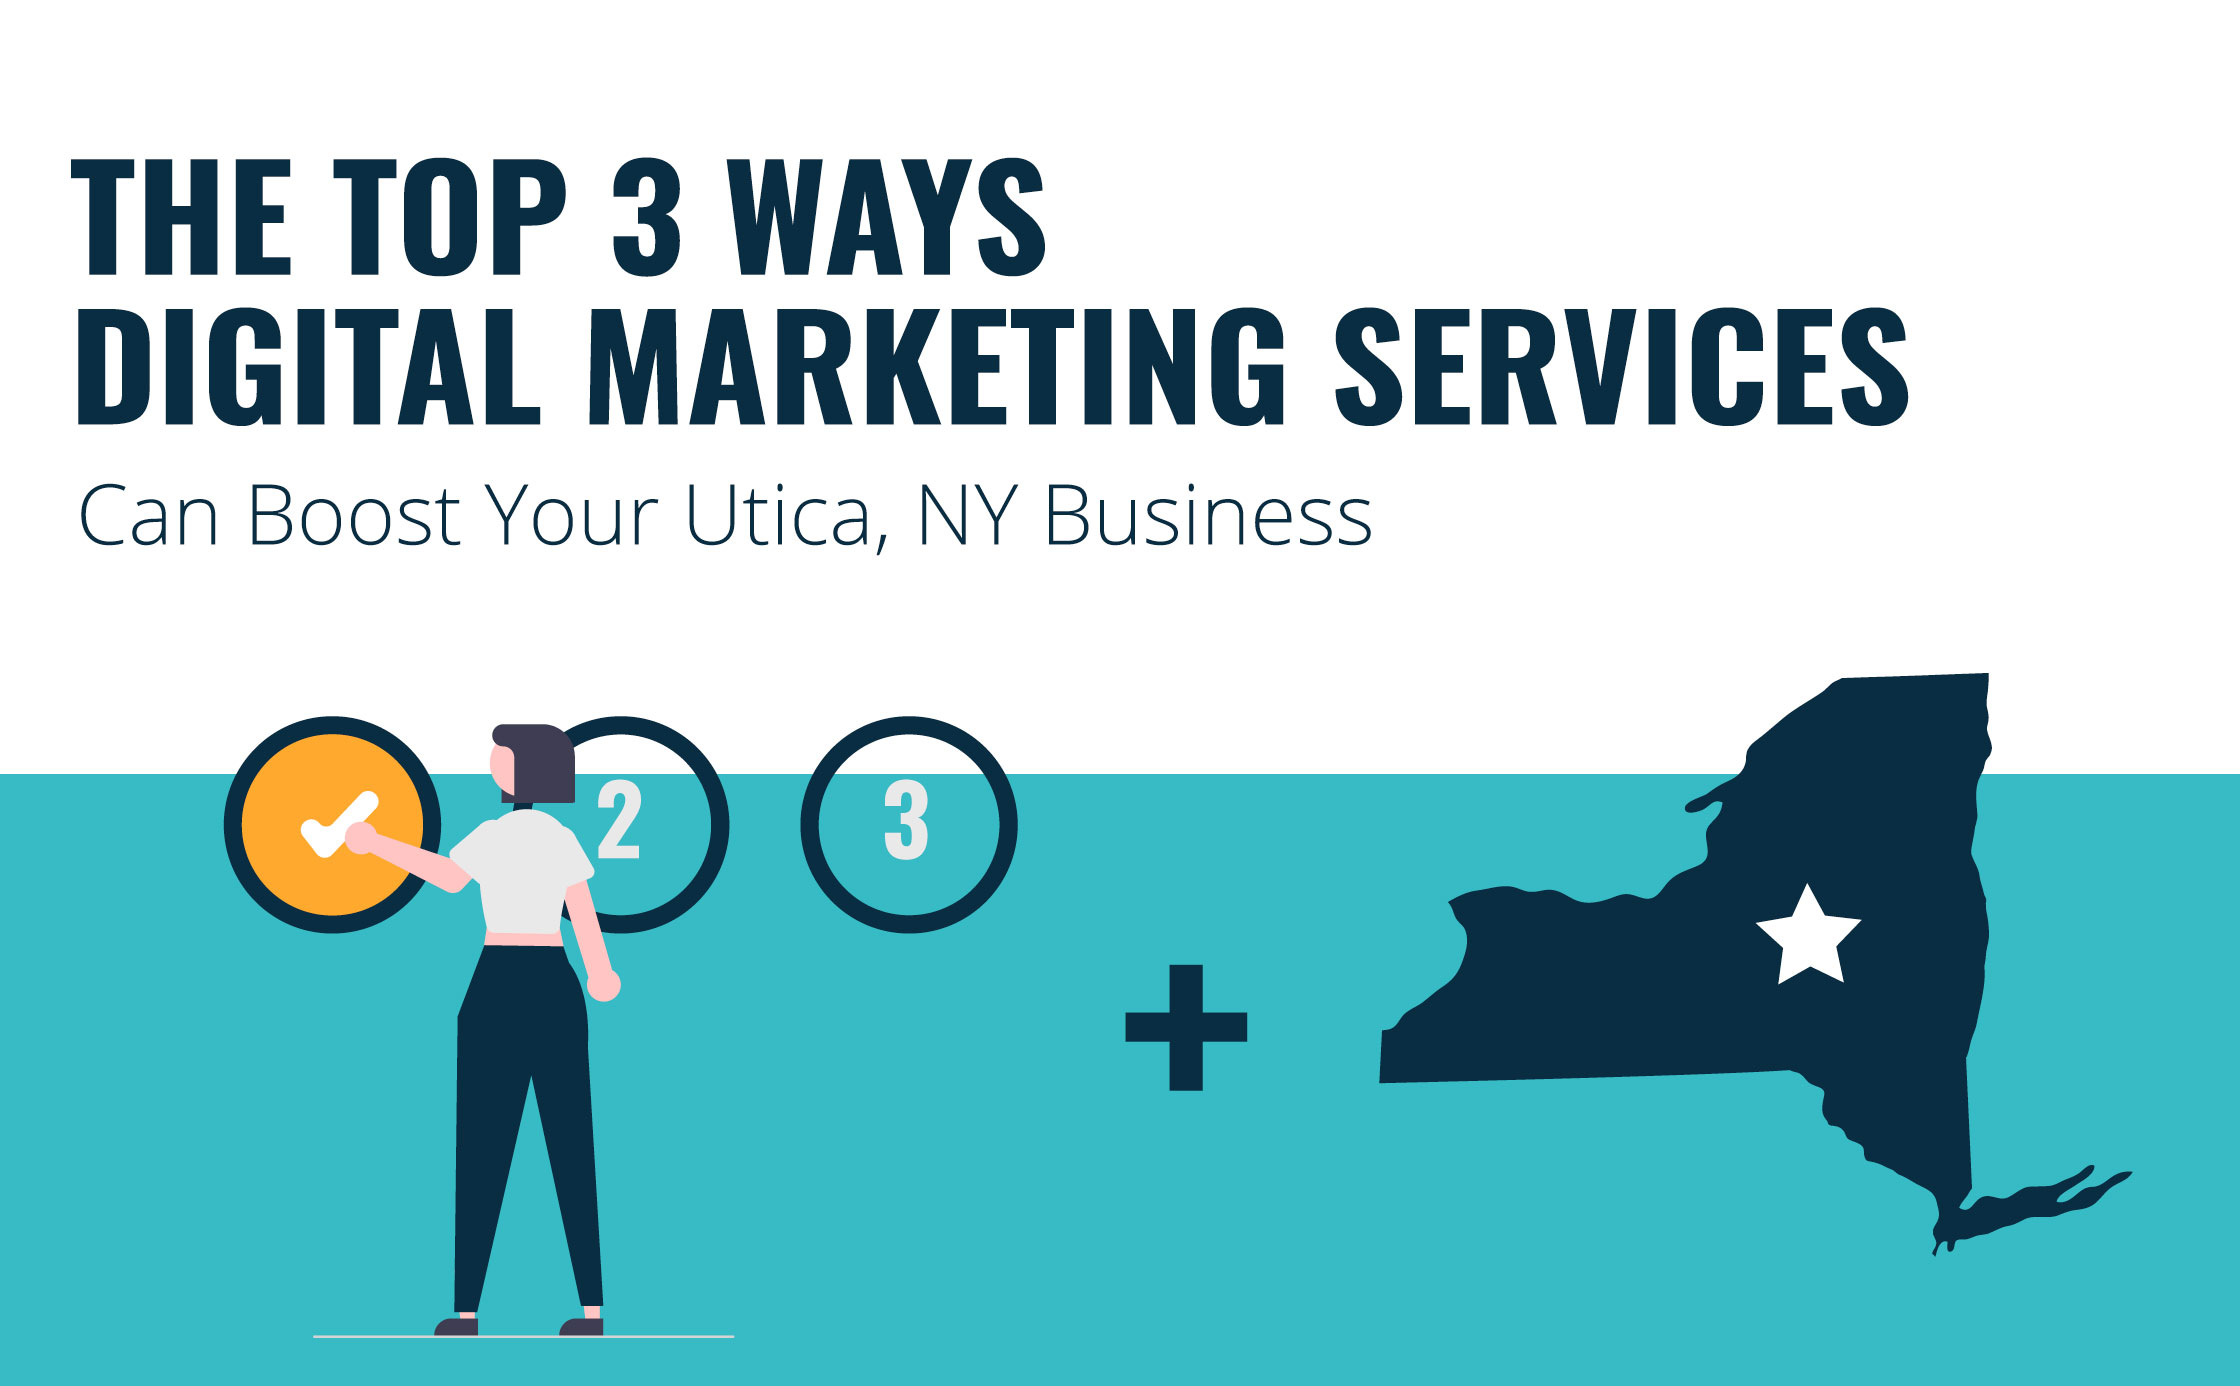 The Top 3 Ways Digital Marketing Services Can Boost Your Utica, NY Business